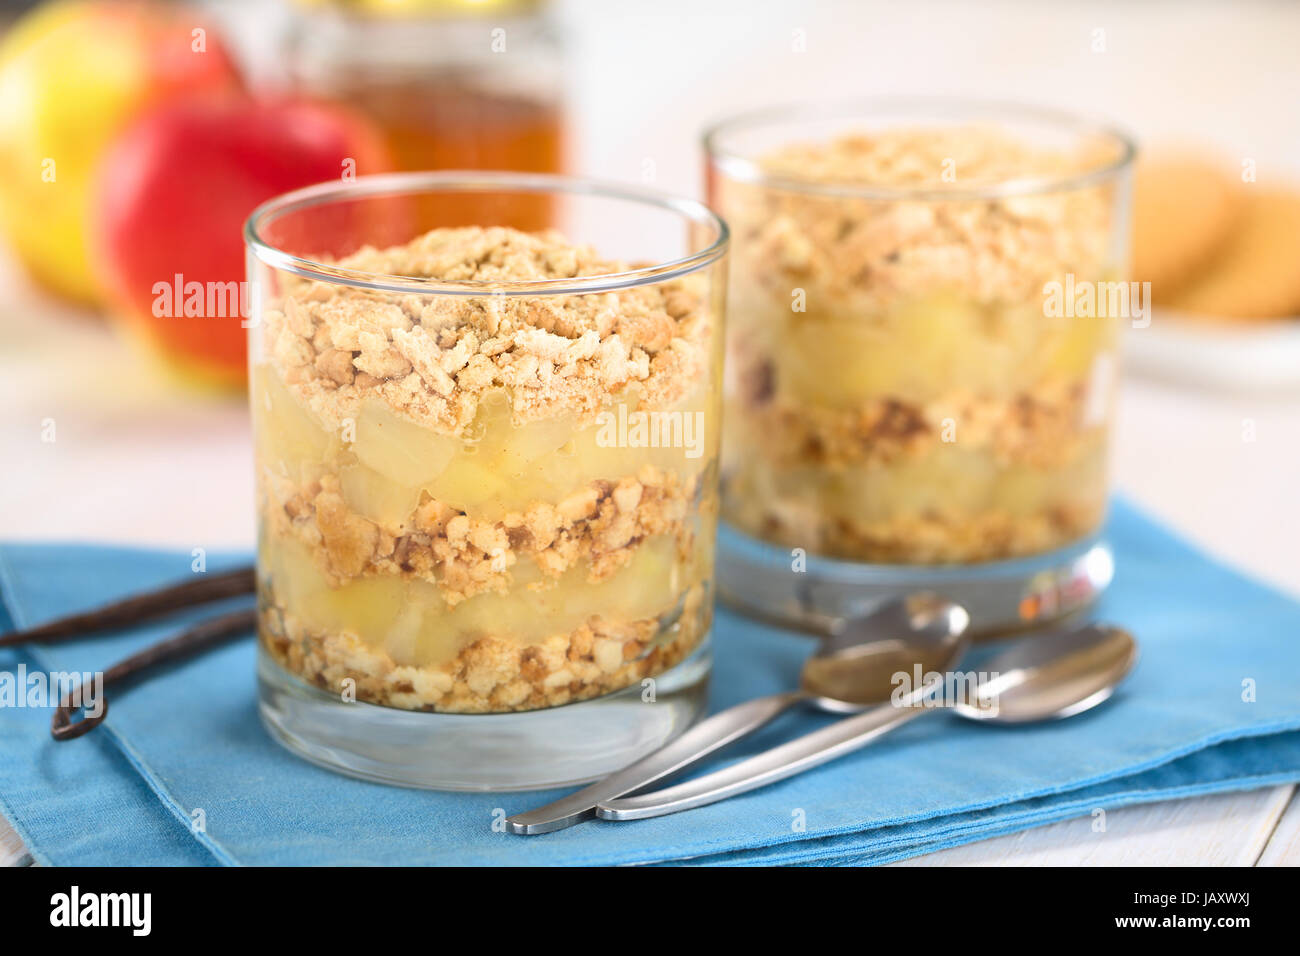 Simple no-bake Danish apple cake called Aeblekage made of stewed apple and vanilla cookie crumbs served in glass (Selective Focus, Focus on the front of the upper two layers) Stock Photo